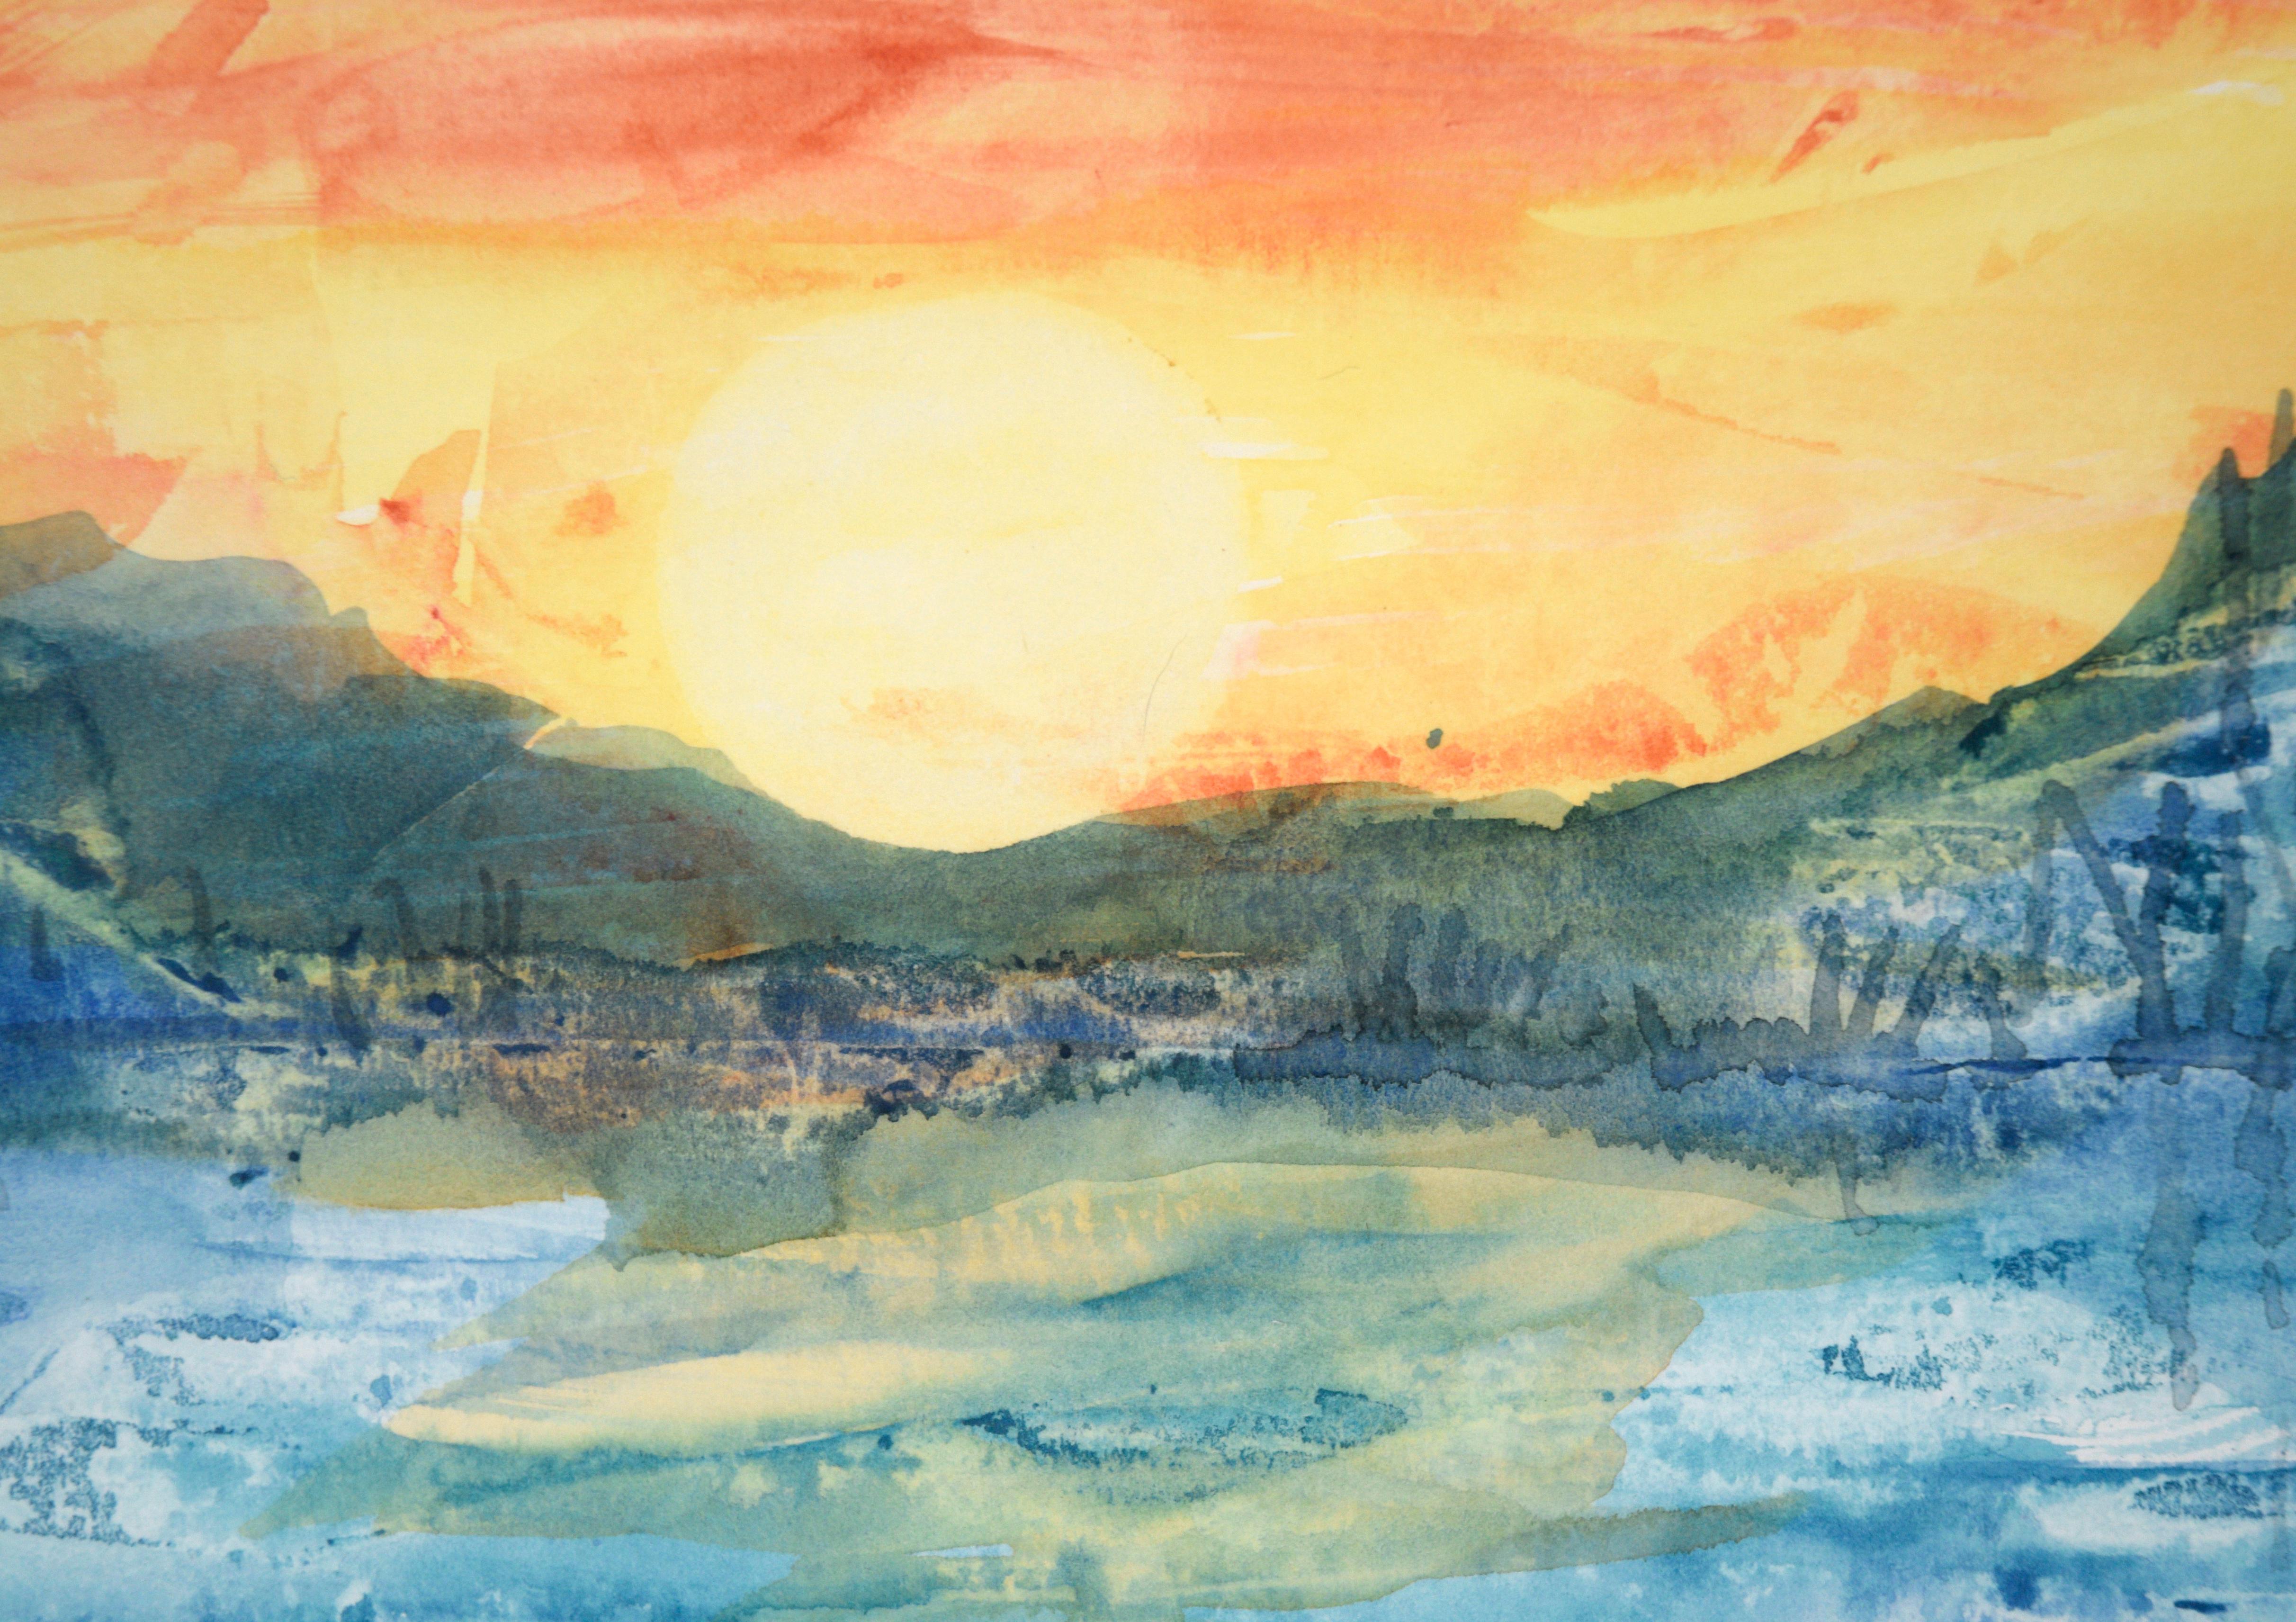 Vibrant depiction of a sunset by Adele Marks. The sun appears to burn white-hot in the center of this piece, radiating warm colors into the sky above and water below. Surrounding the bright red, orange, and yellow areas is a cool landscape of blue,